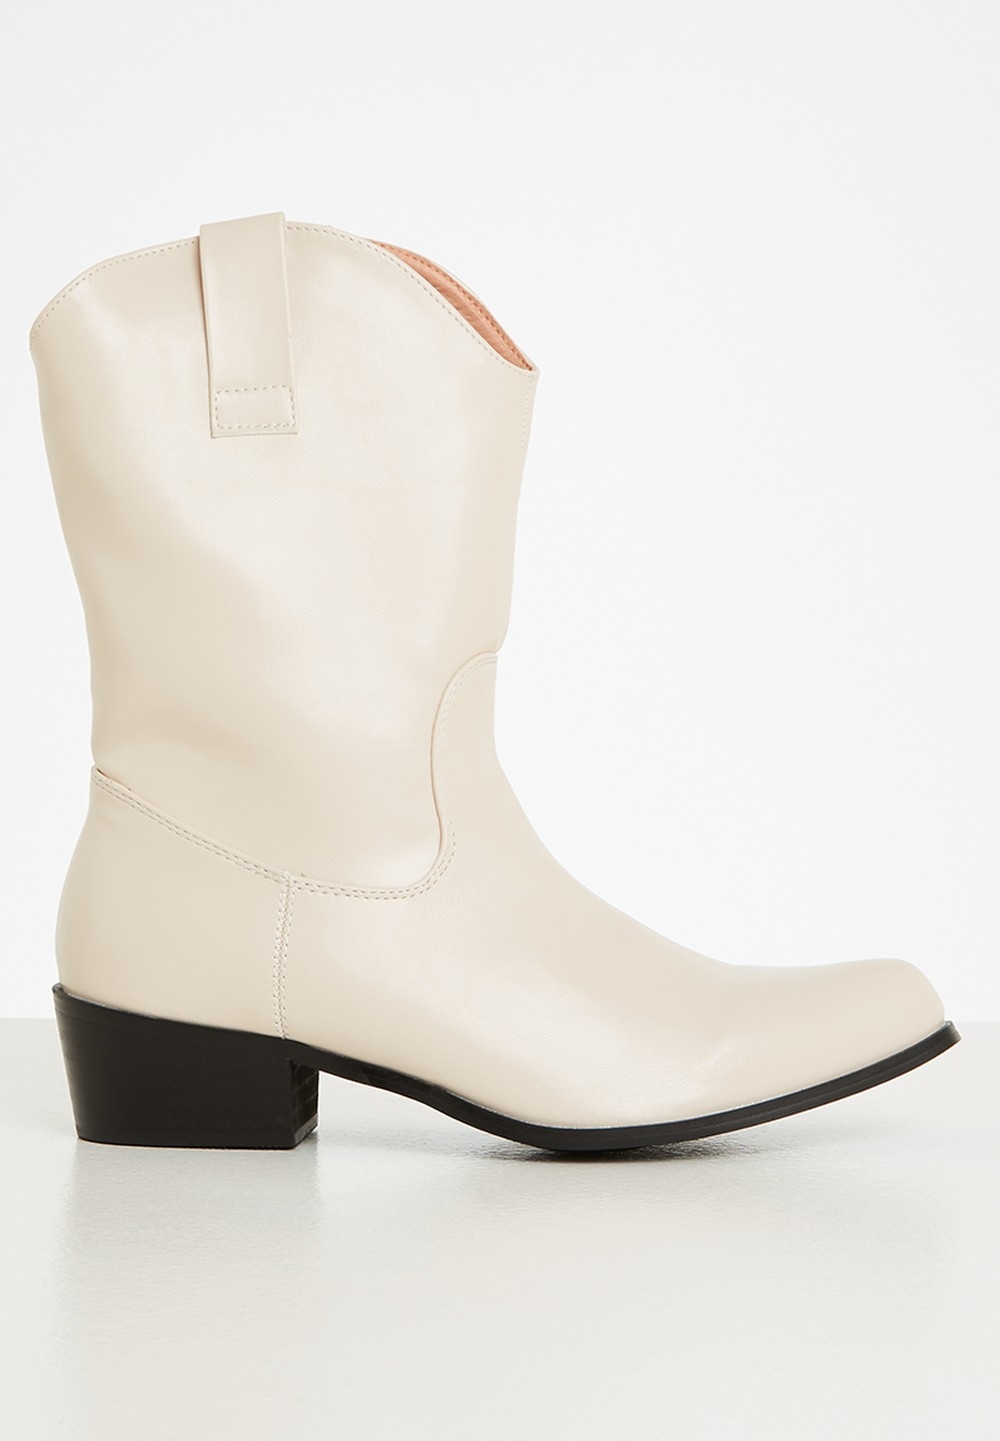 MyRunway | Shop edit Trinty ankle boot - neutral for Women from ...